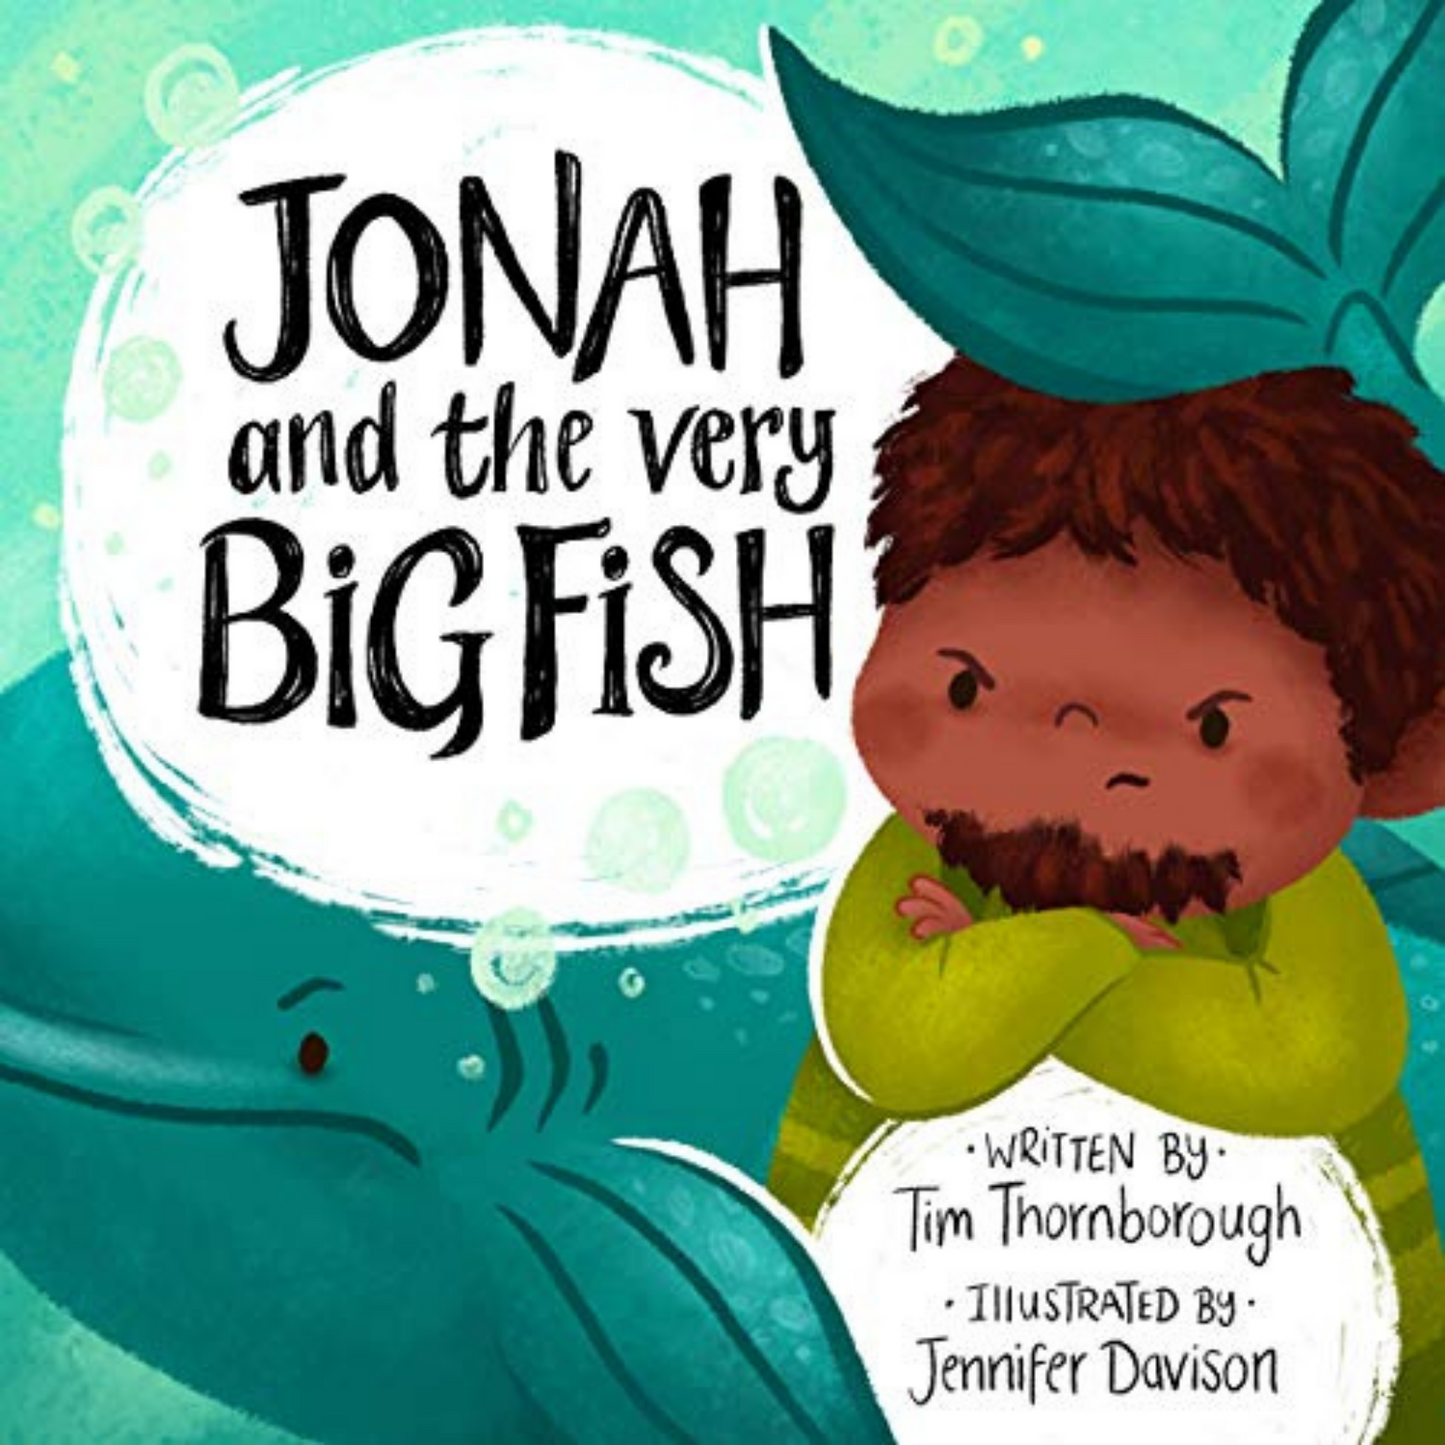 Jonah and the very big fish in